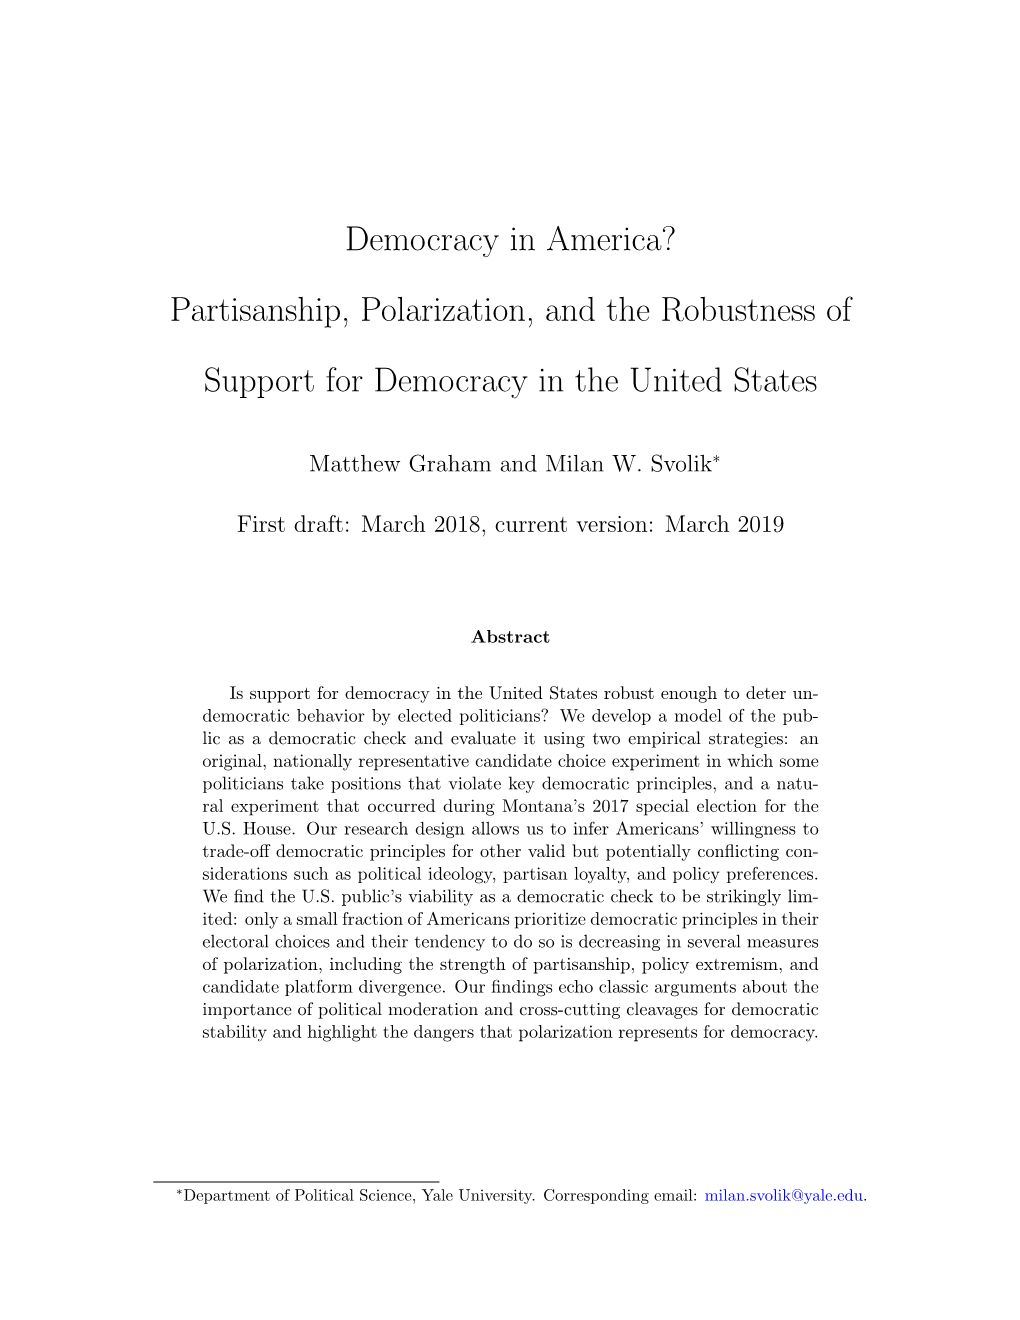 Democracy in America? Partisanship, Polarization, and the Robustness Of